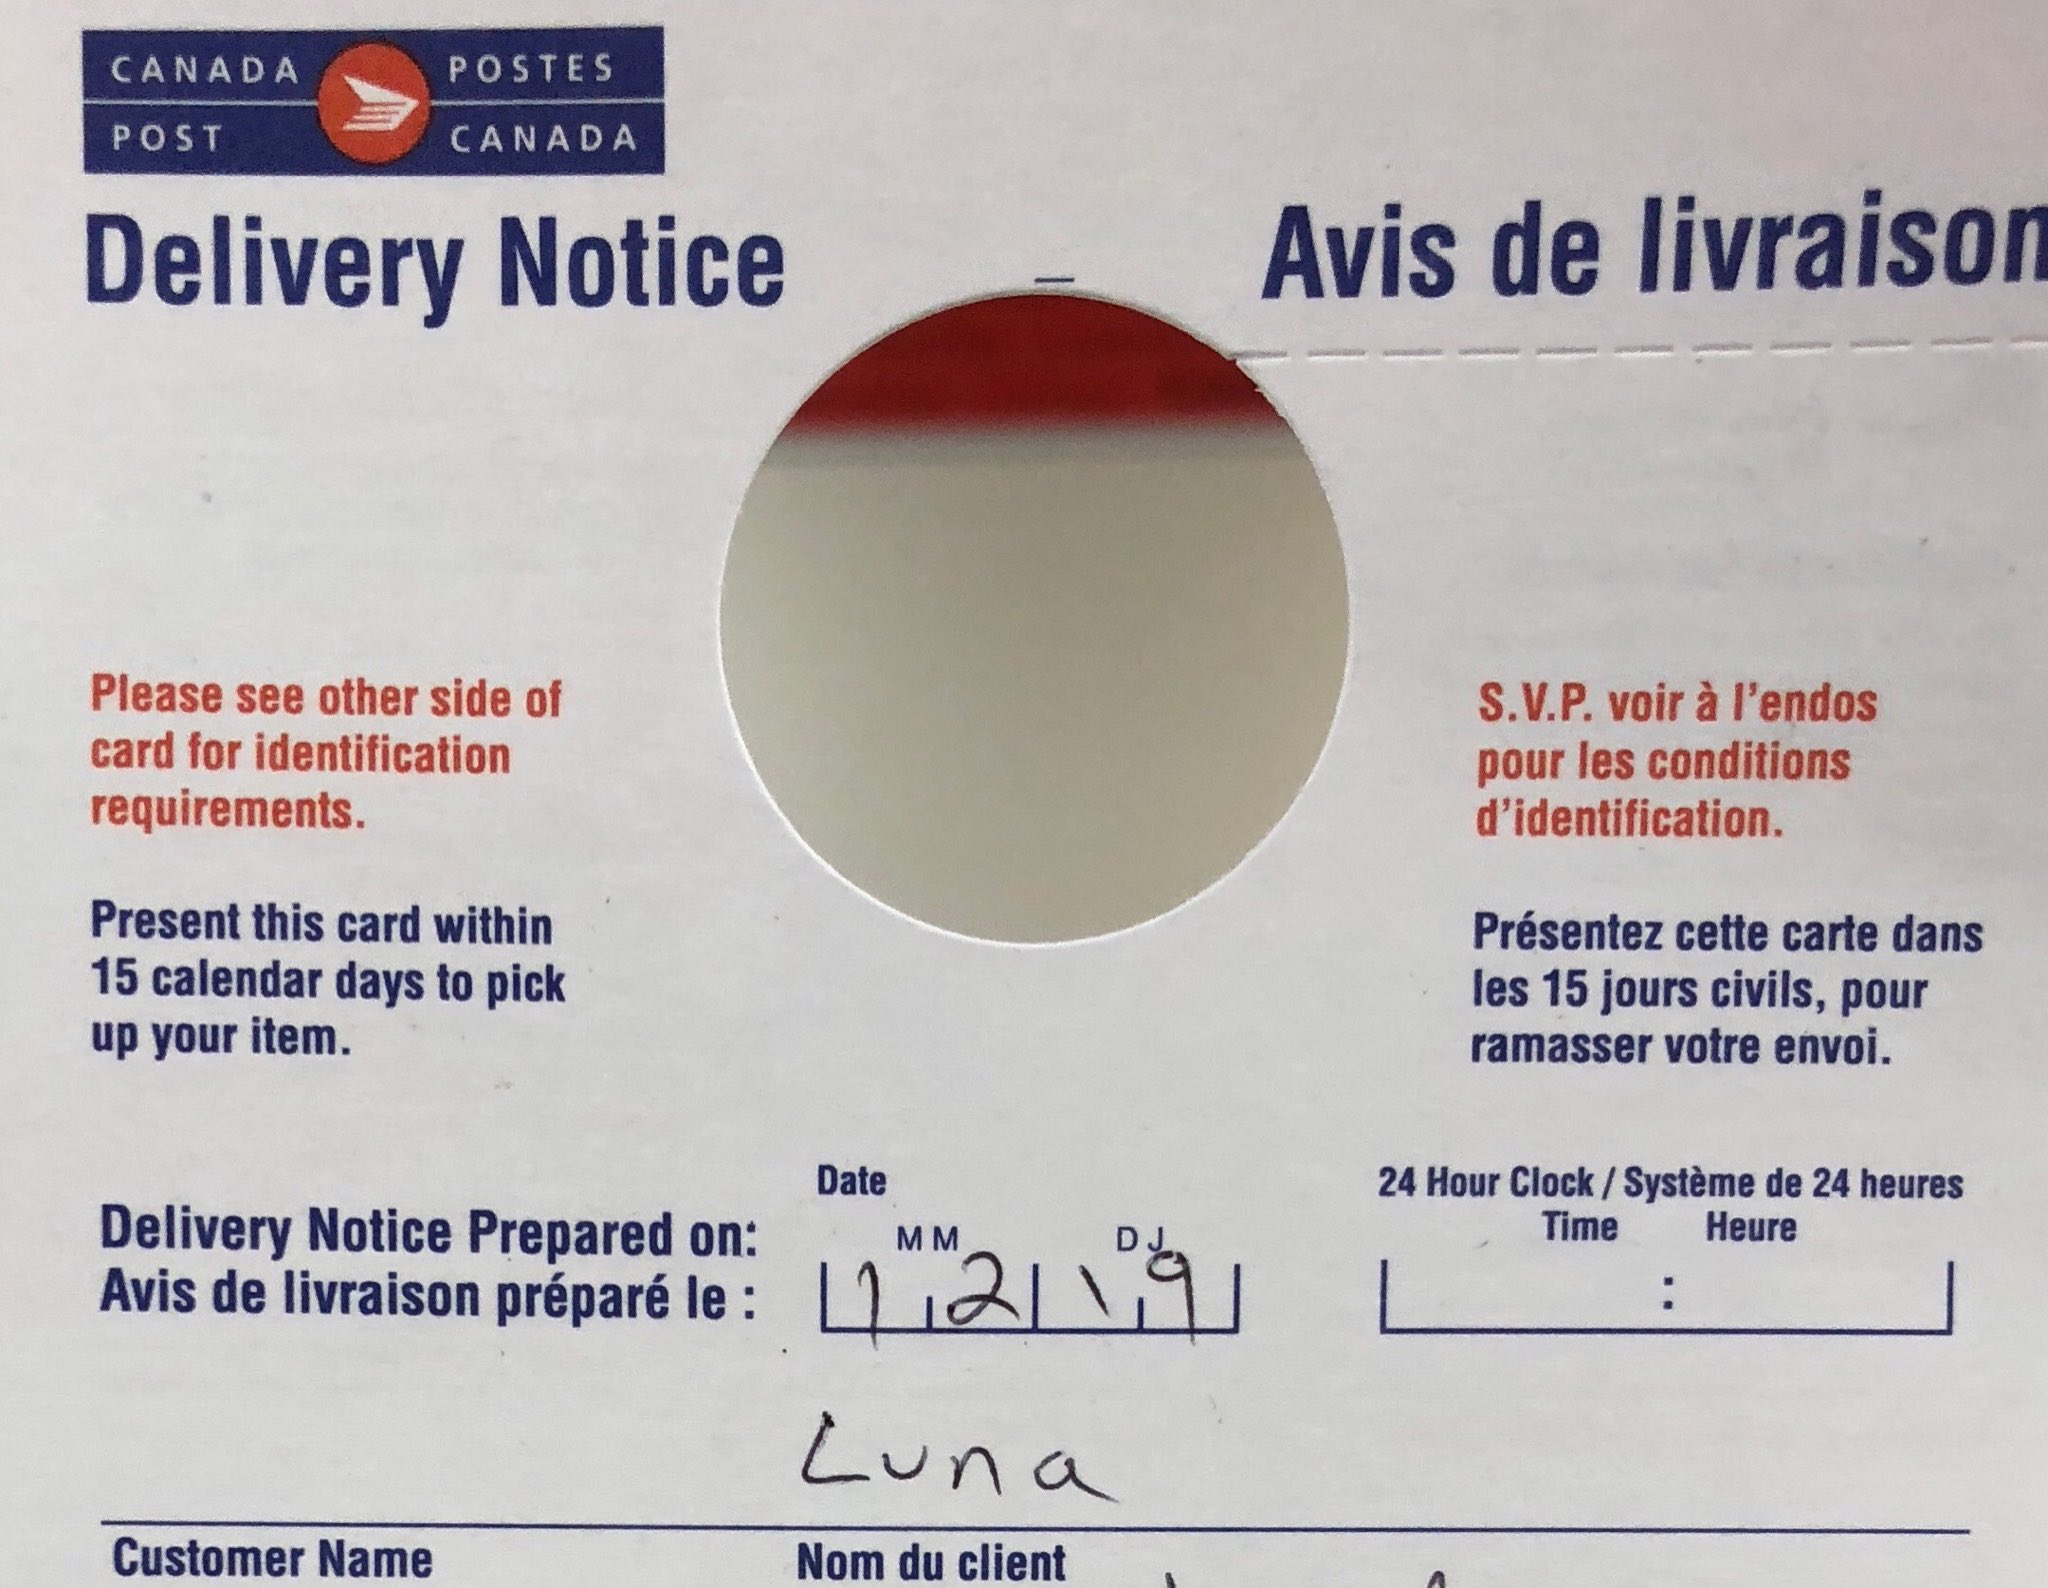 What To Do When Canada Post Misses Your Delivery And You Need To Pick It Up The Same Day  